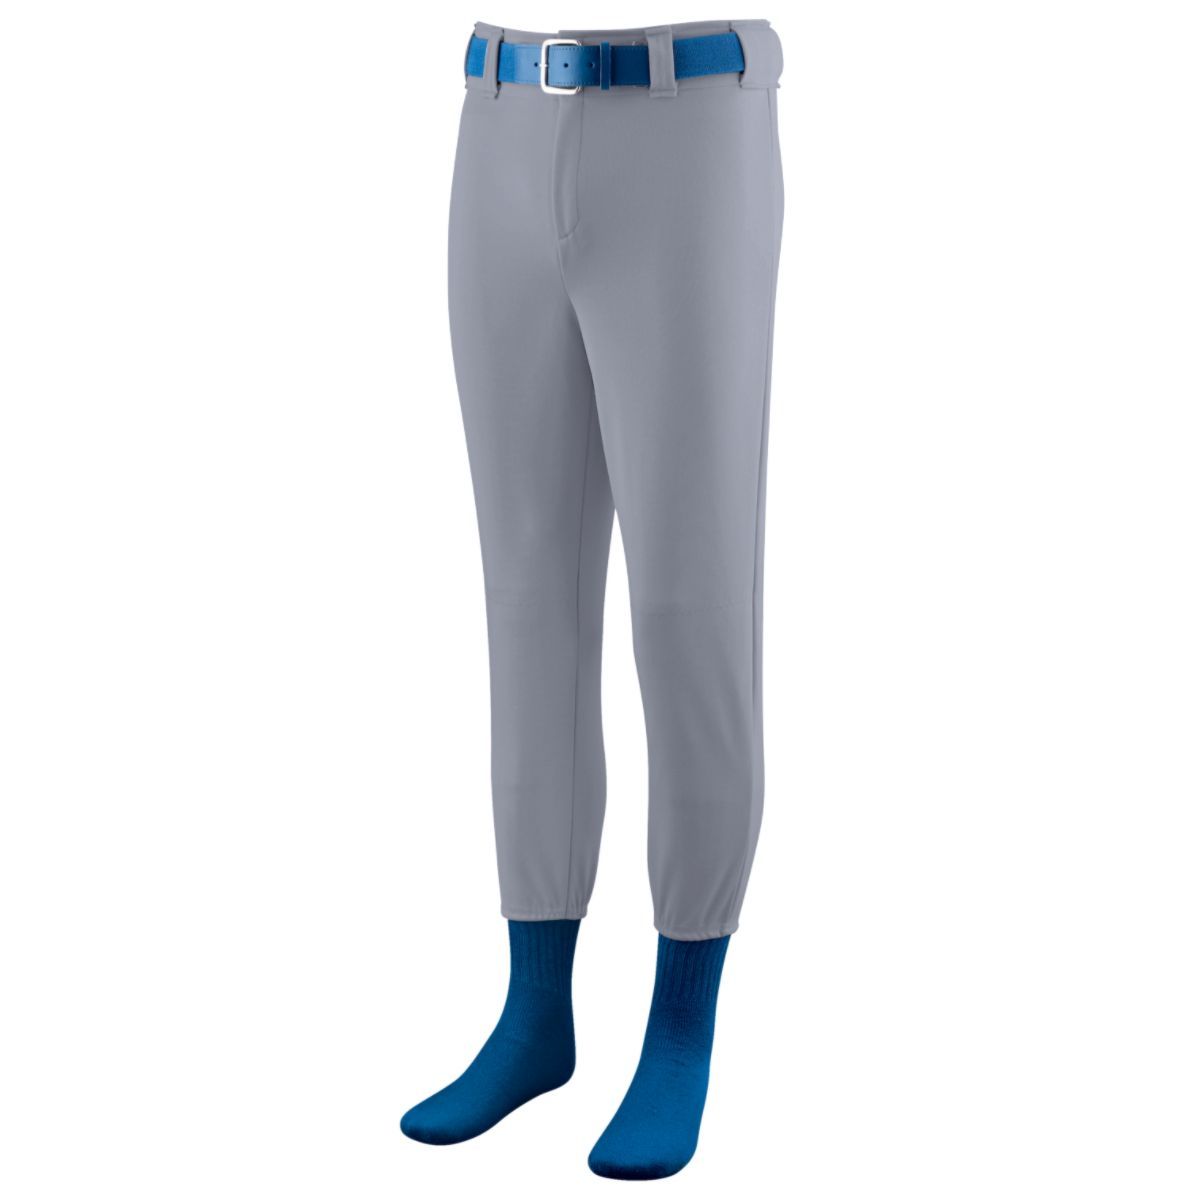 Augusta Sportswear Youth Softball/Baseball Pant in Blue Grey  -Part of the Youth, Youth-Pants, Pants, Augusta-Products, Softball product lines at KanaleyCreations.com